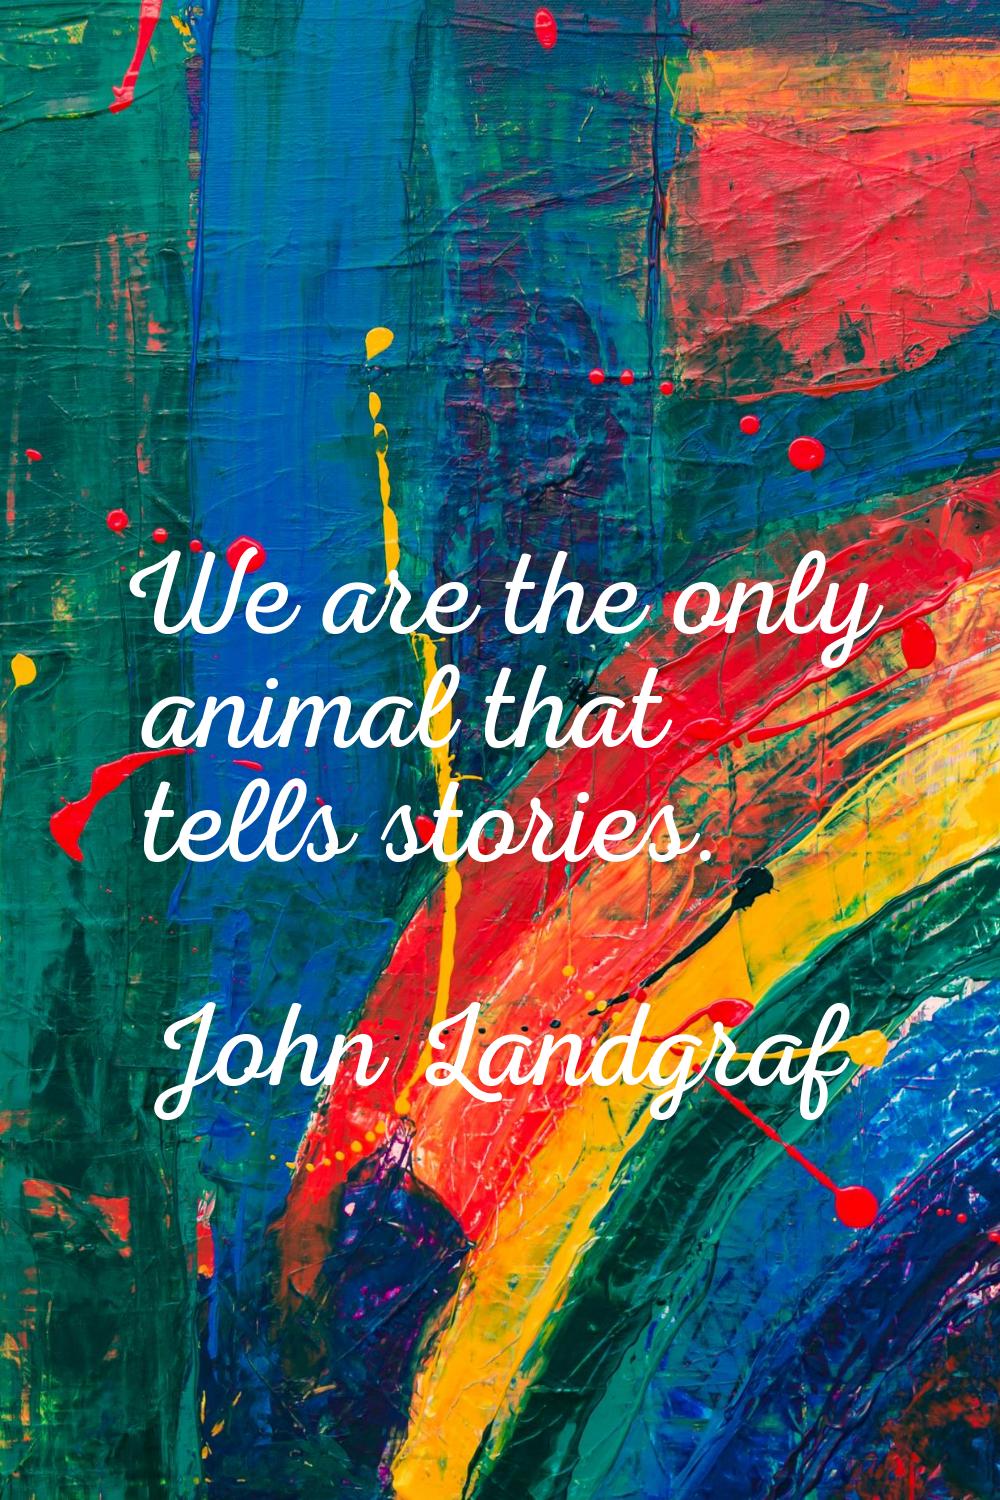 We are the only animal that tells stories.